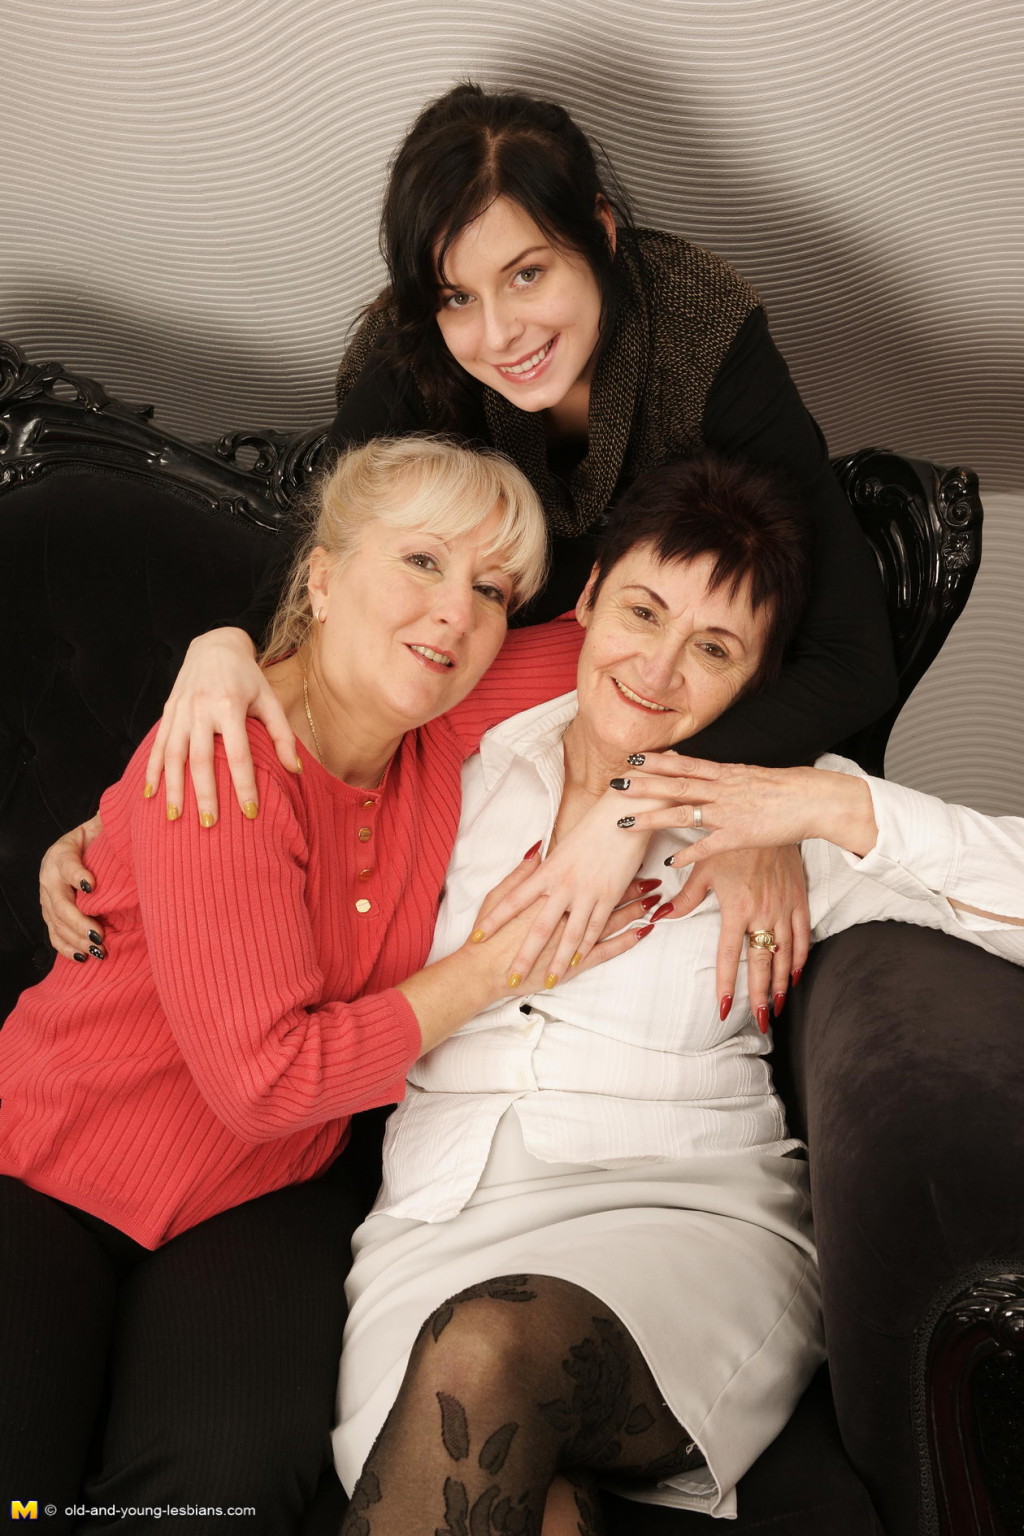 Three old and young lesbians making it hot and steamy #76139435